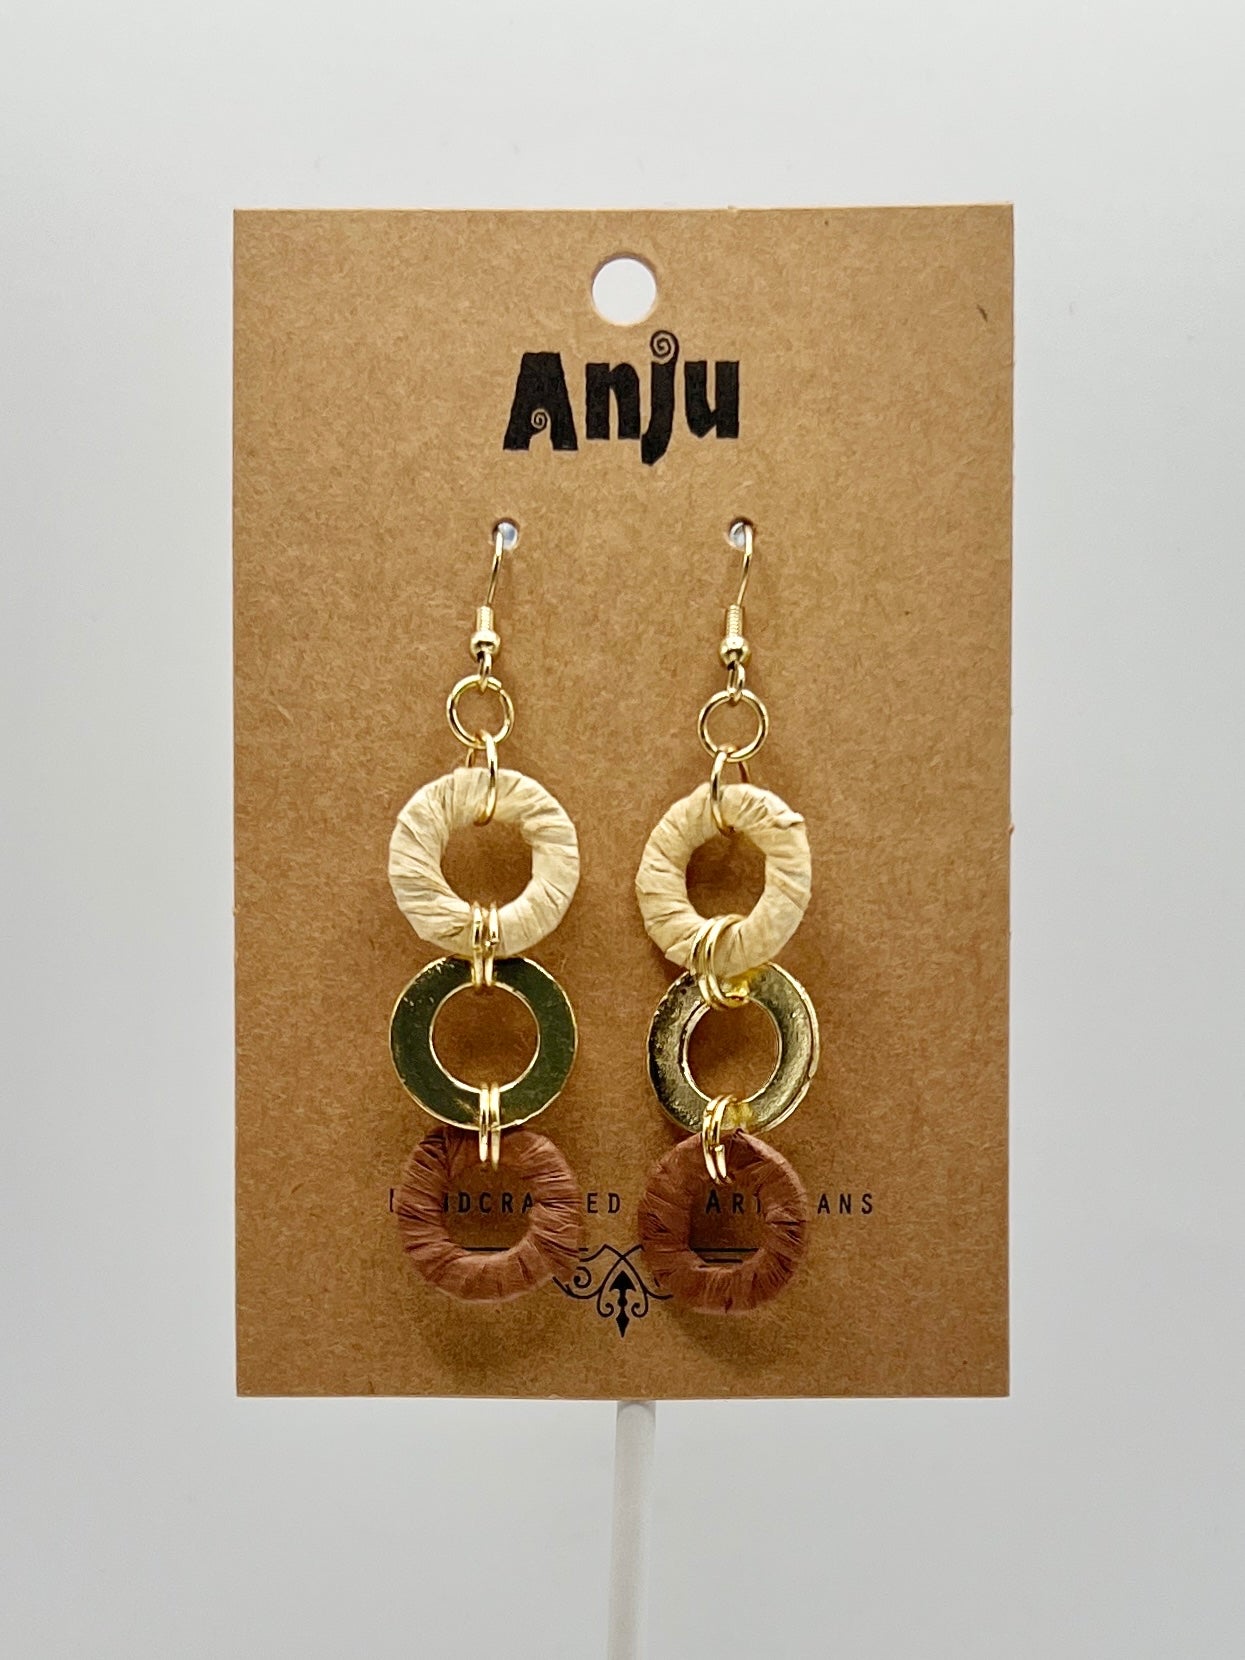 The Sachi Collection  by Anju